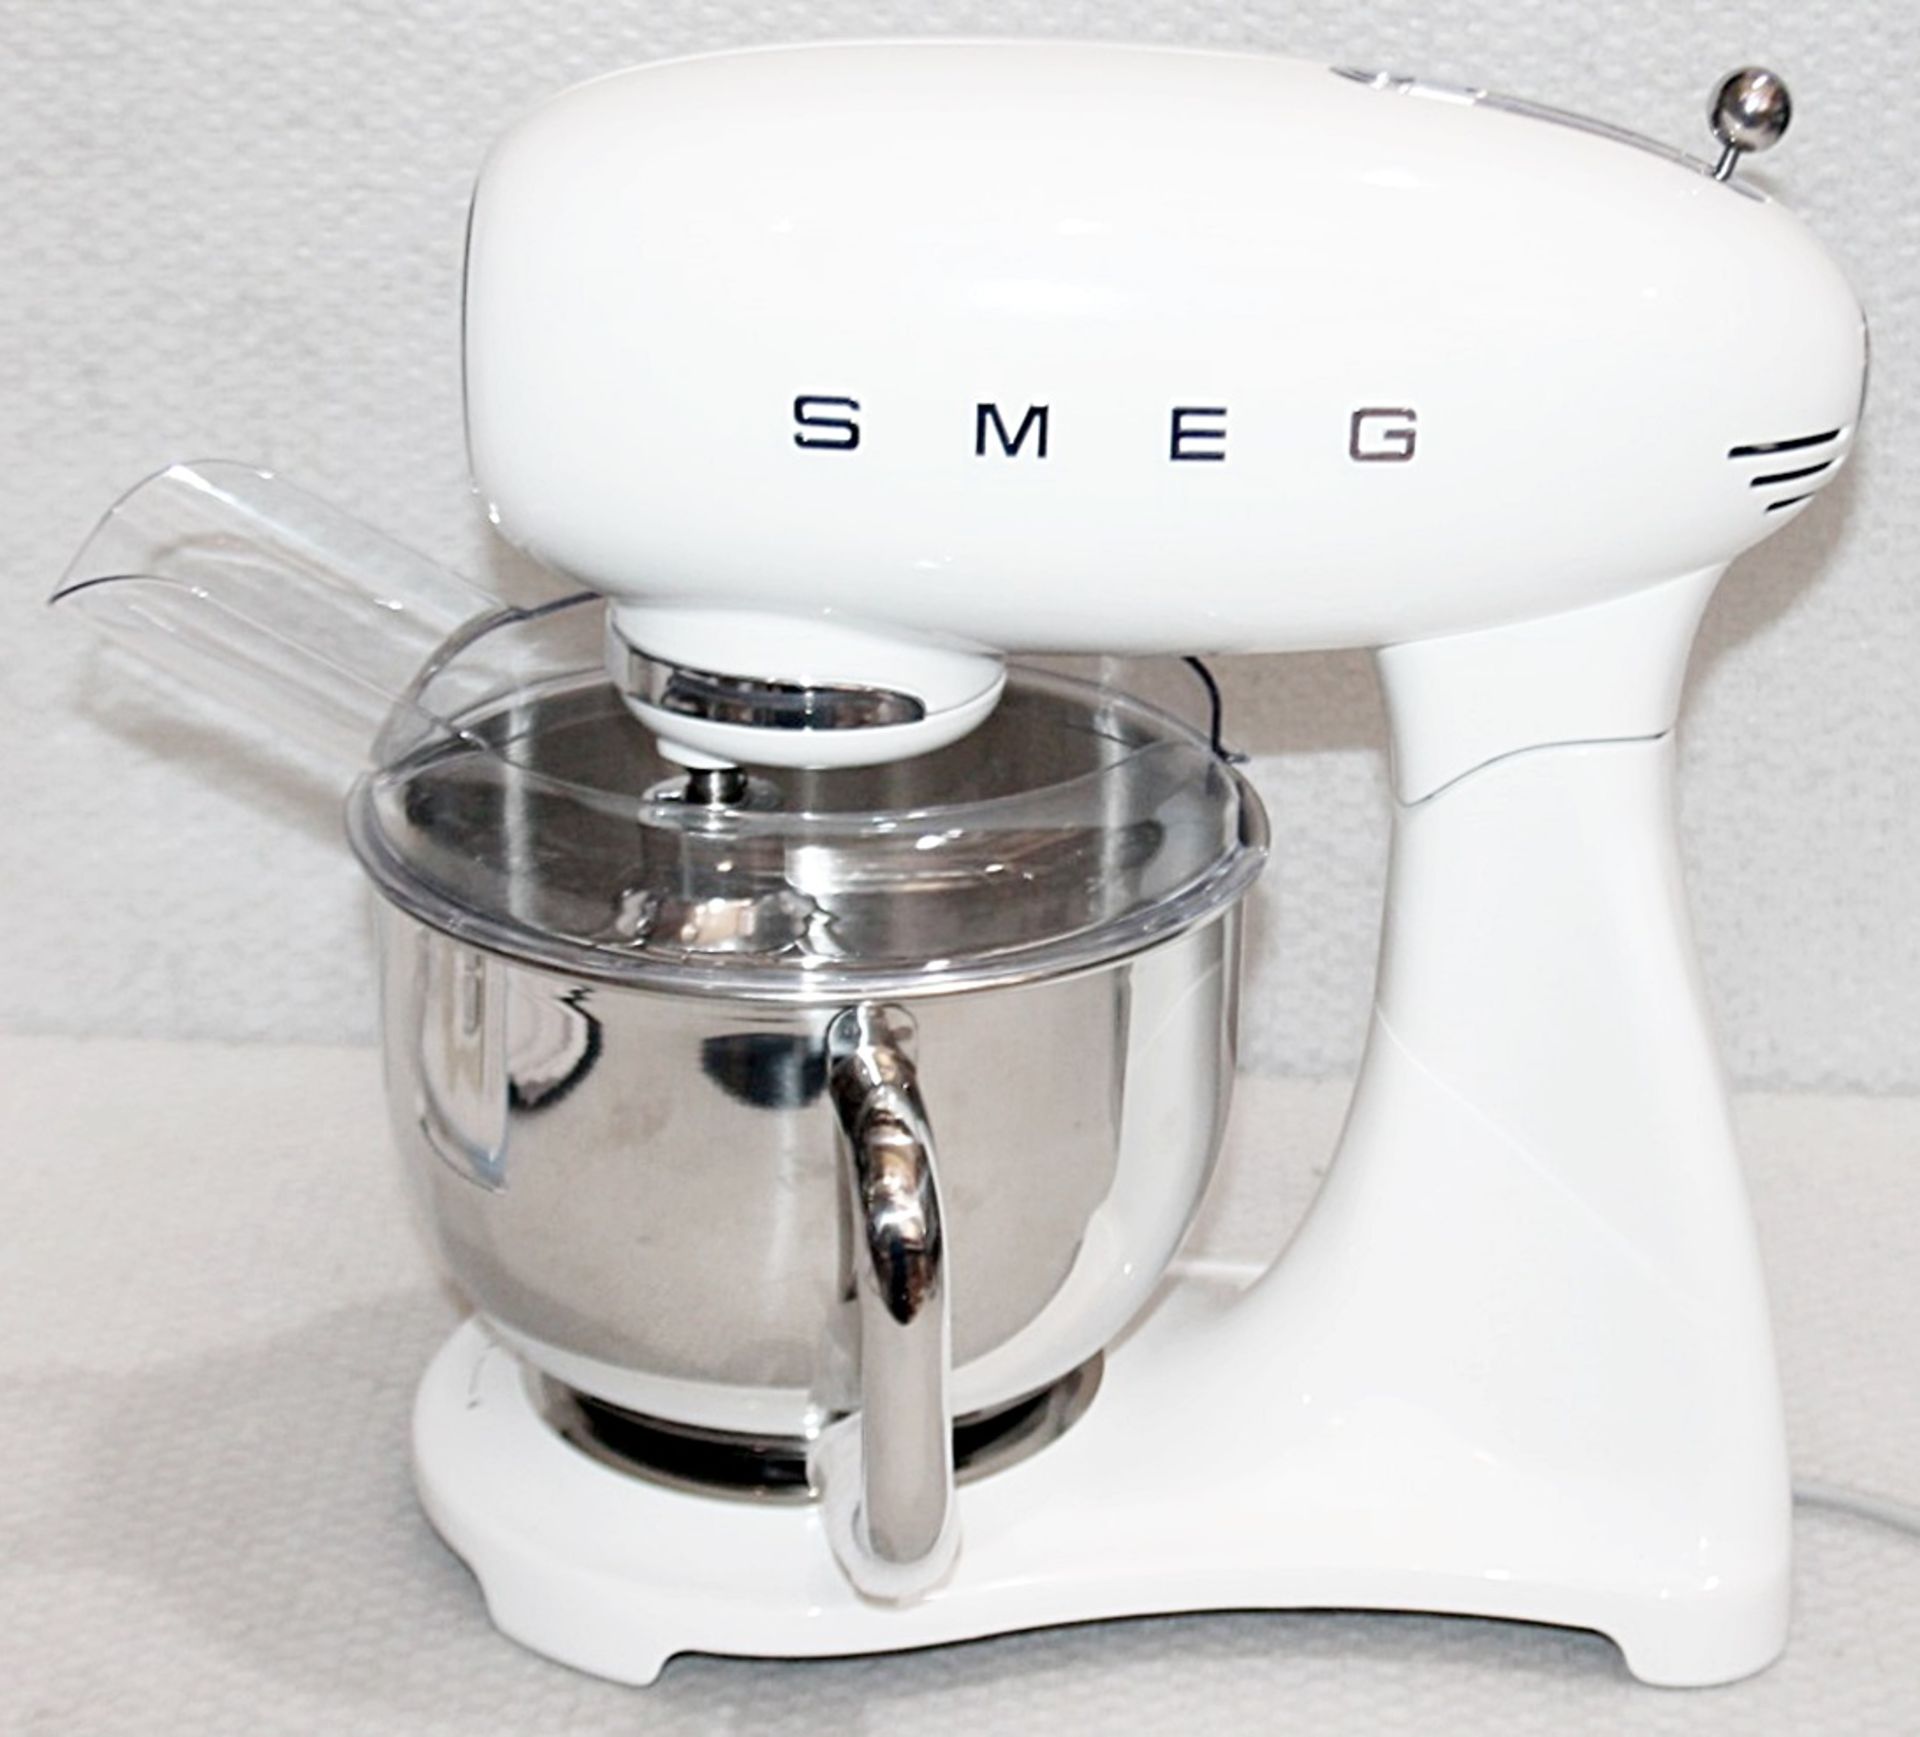 1 x SMEG 50'S Style Stand Mixer In White (4.8L) - Original Price £499.00 - Unused Boxed Stock - Image 3 of 21